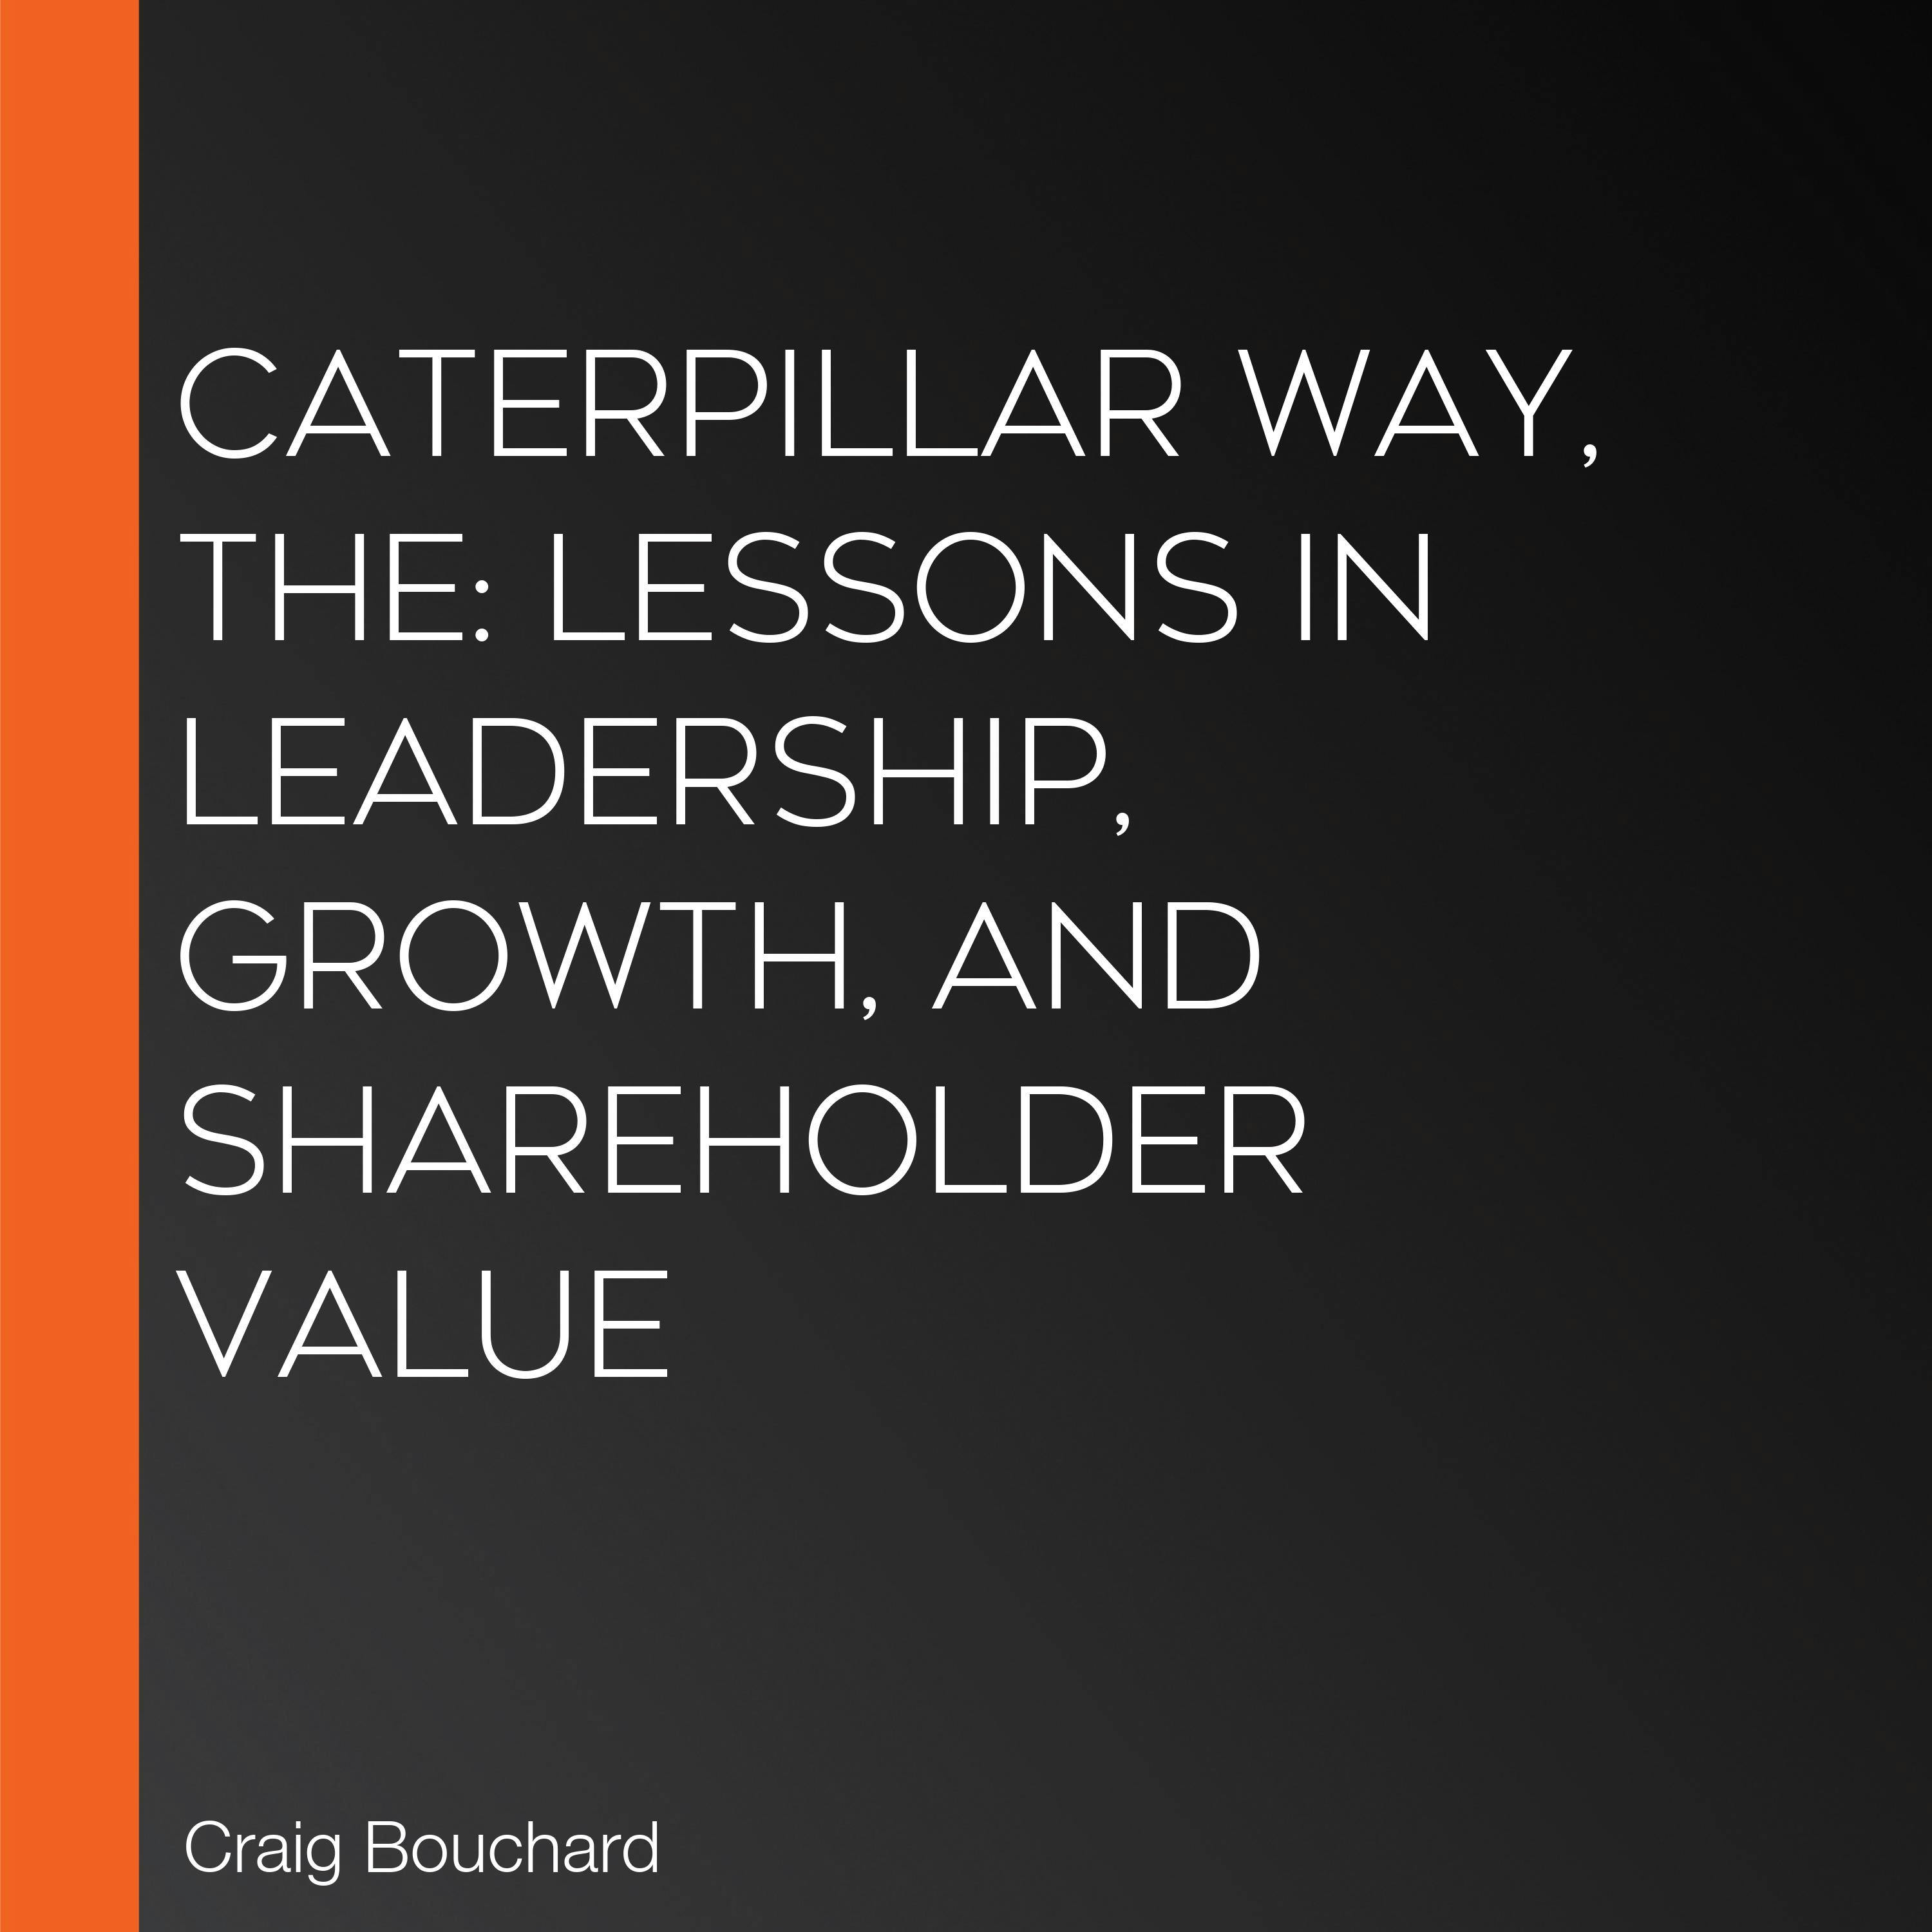 The Caterpillar Way: Lessons in Leadership, Growth, and Shareholder Value - undefined